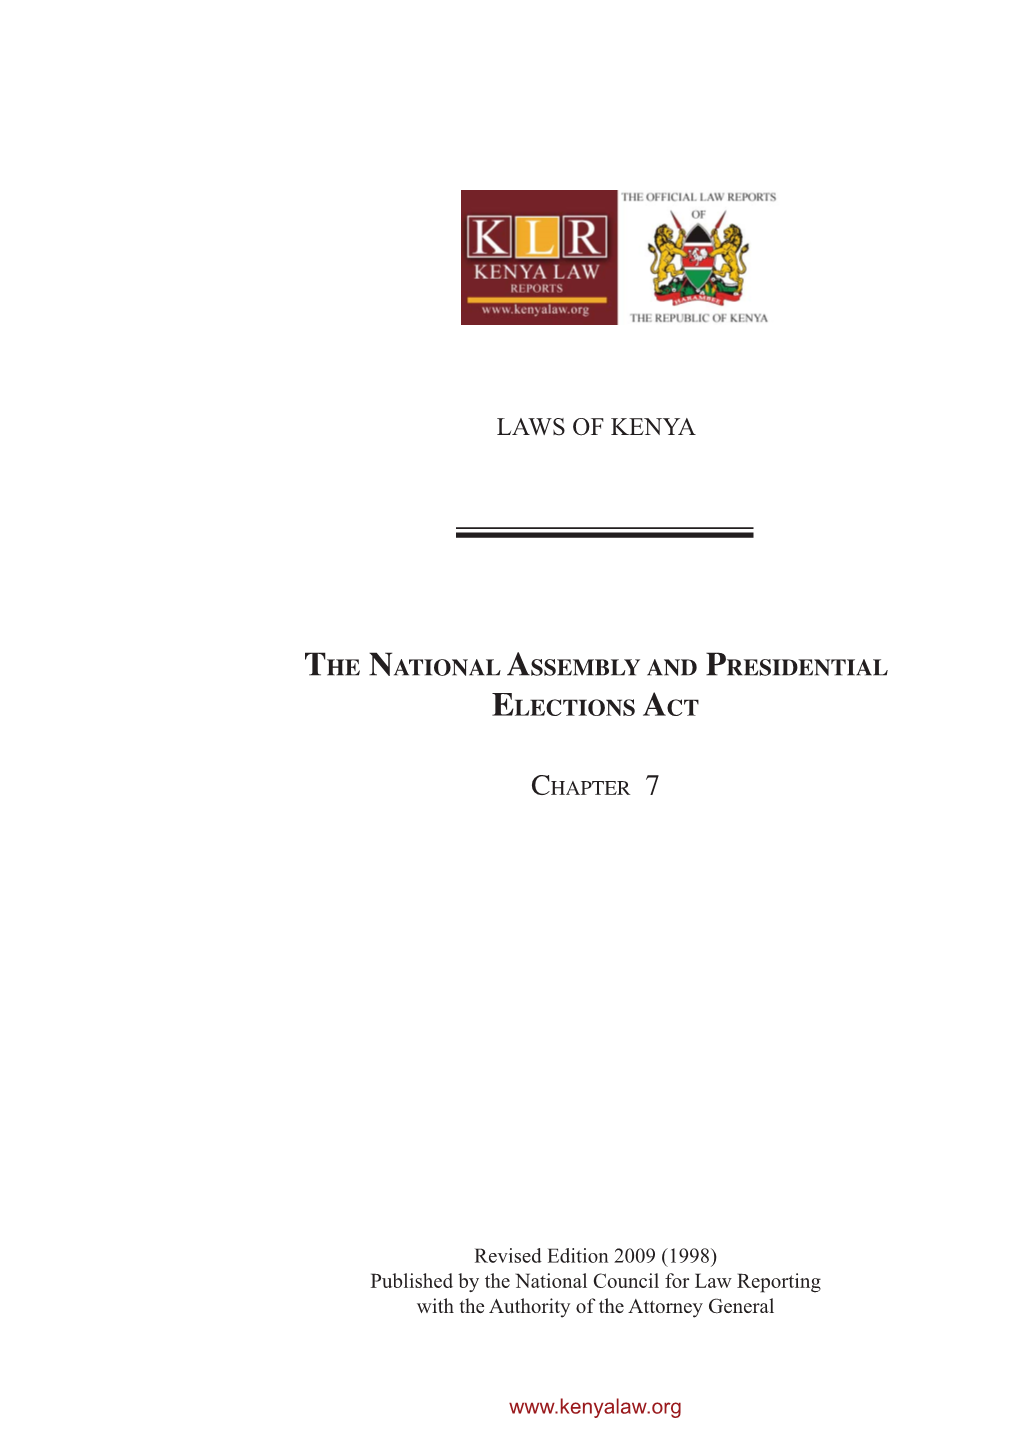 National Assembly and Presidential Elections Act